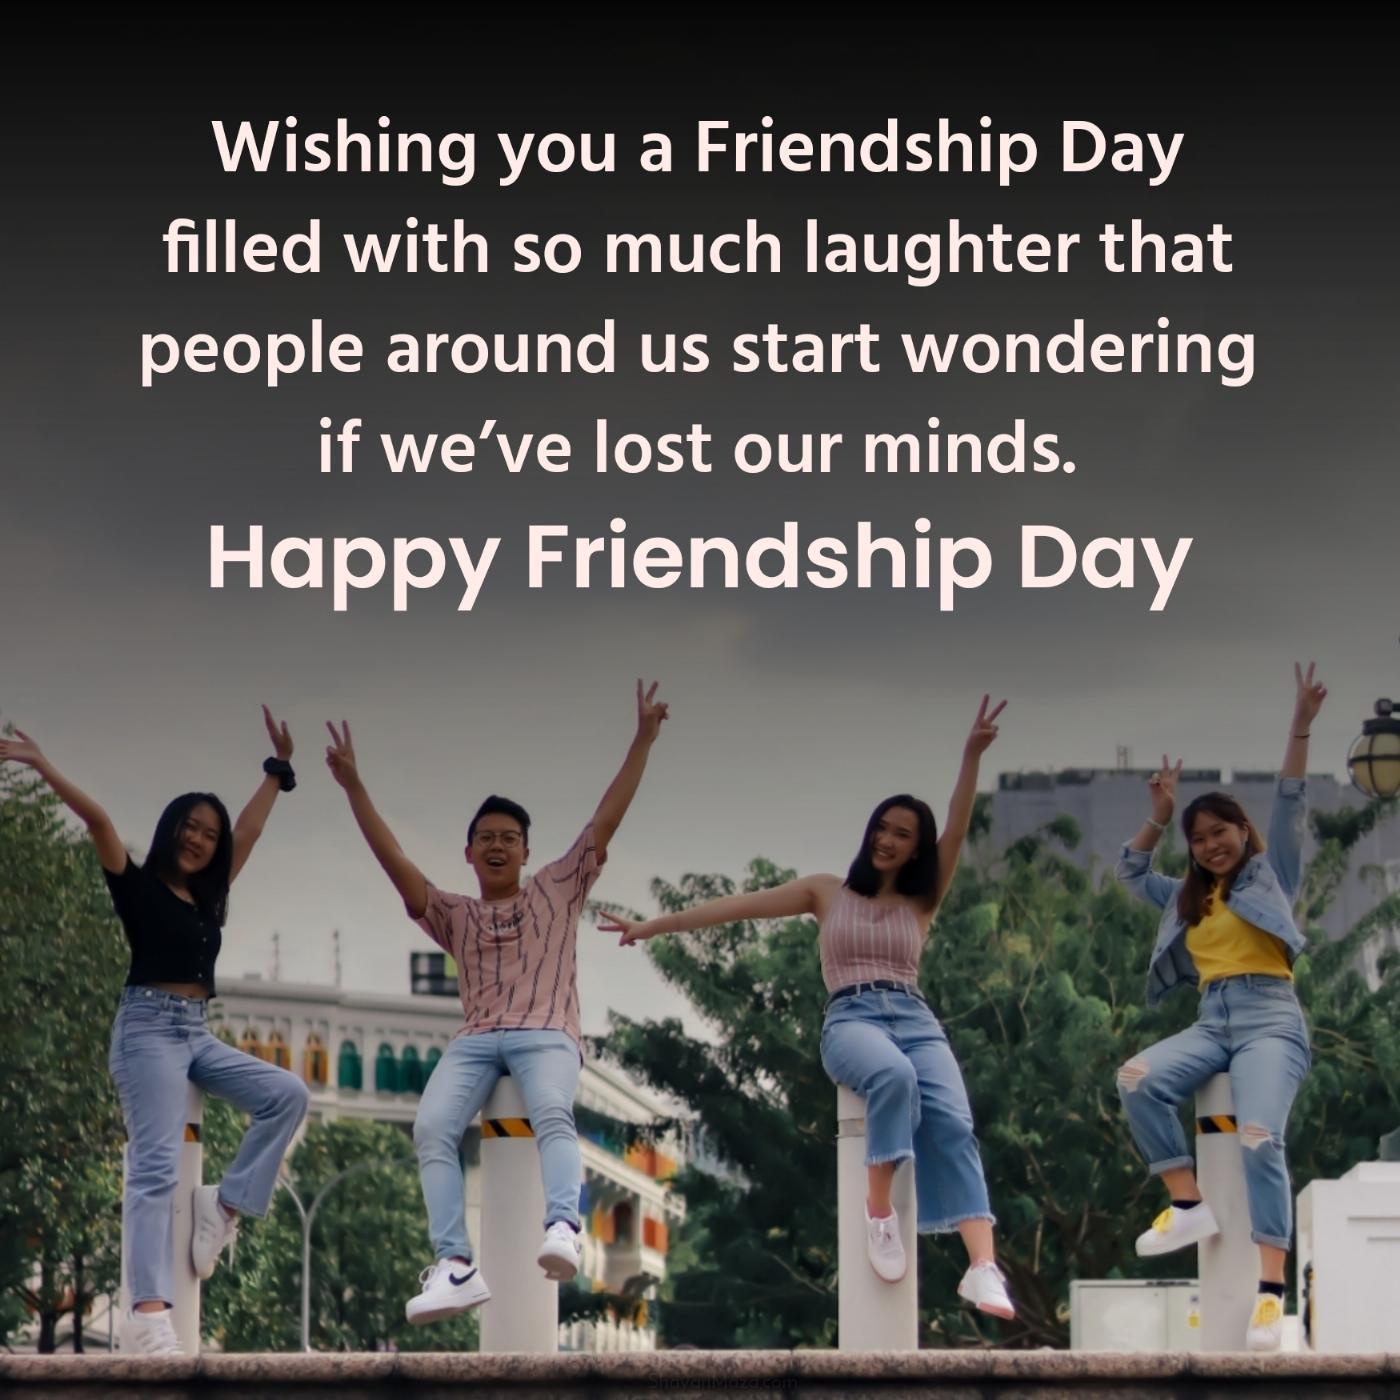 Wishing you a Friendship Day filled with so much laughter that people around us